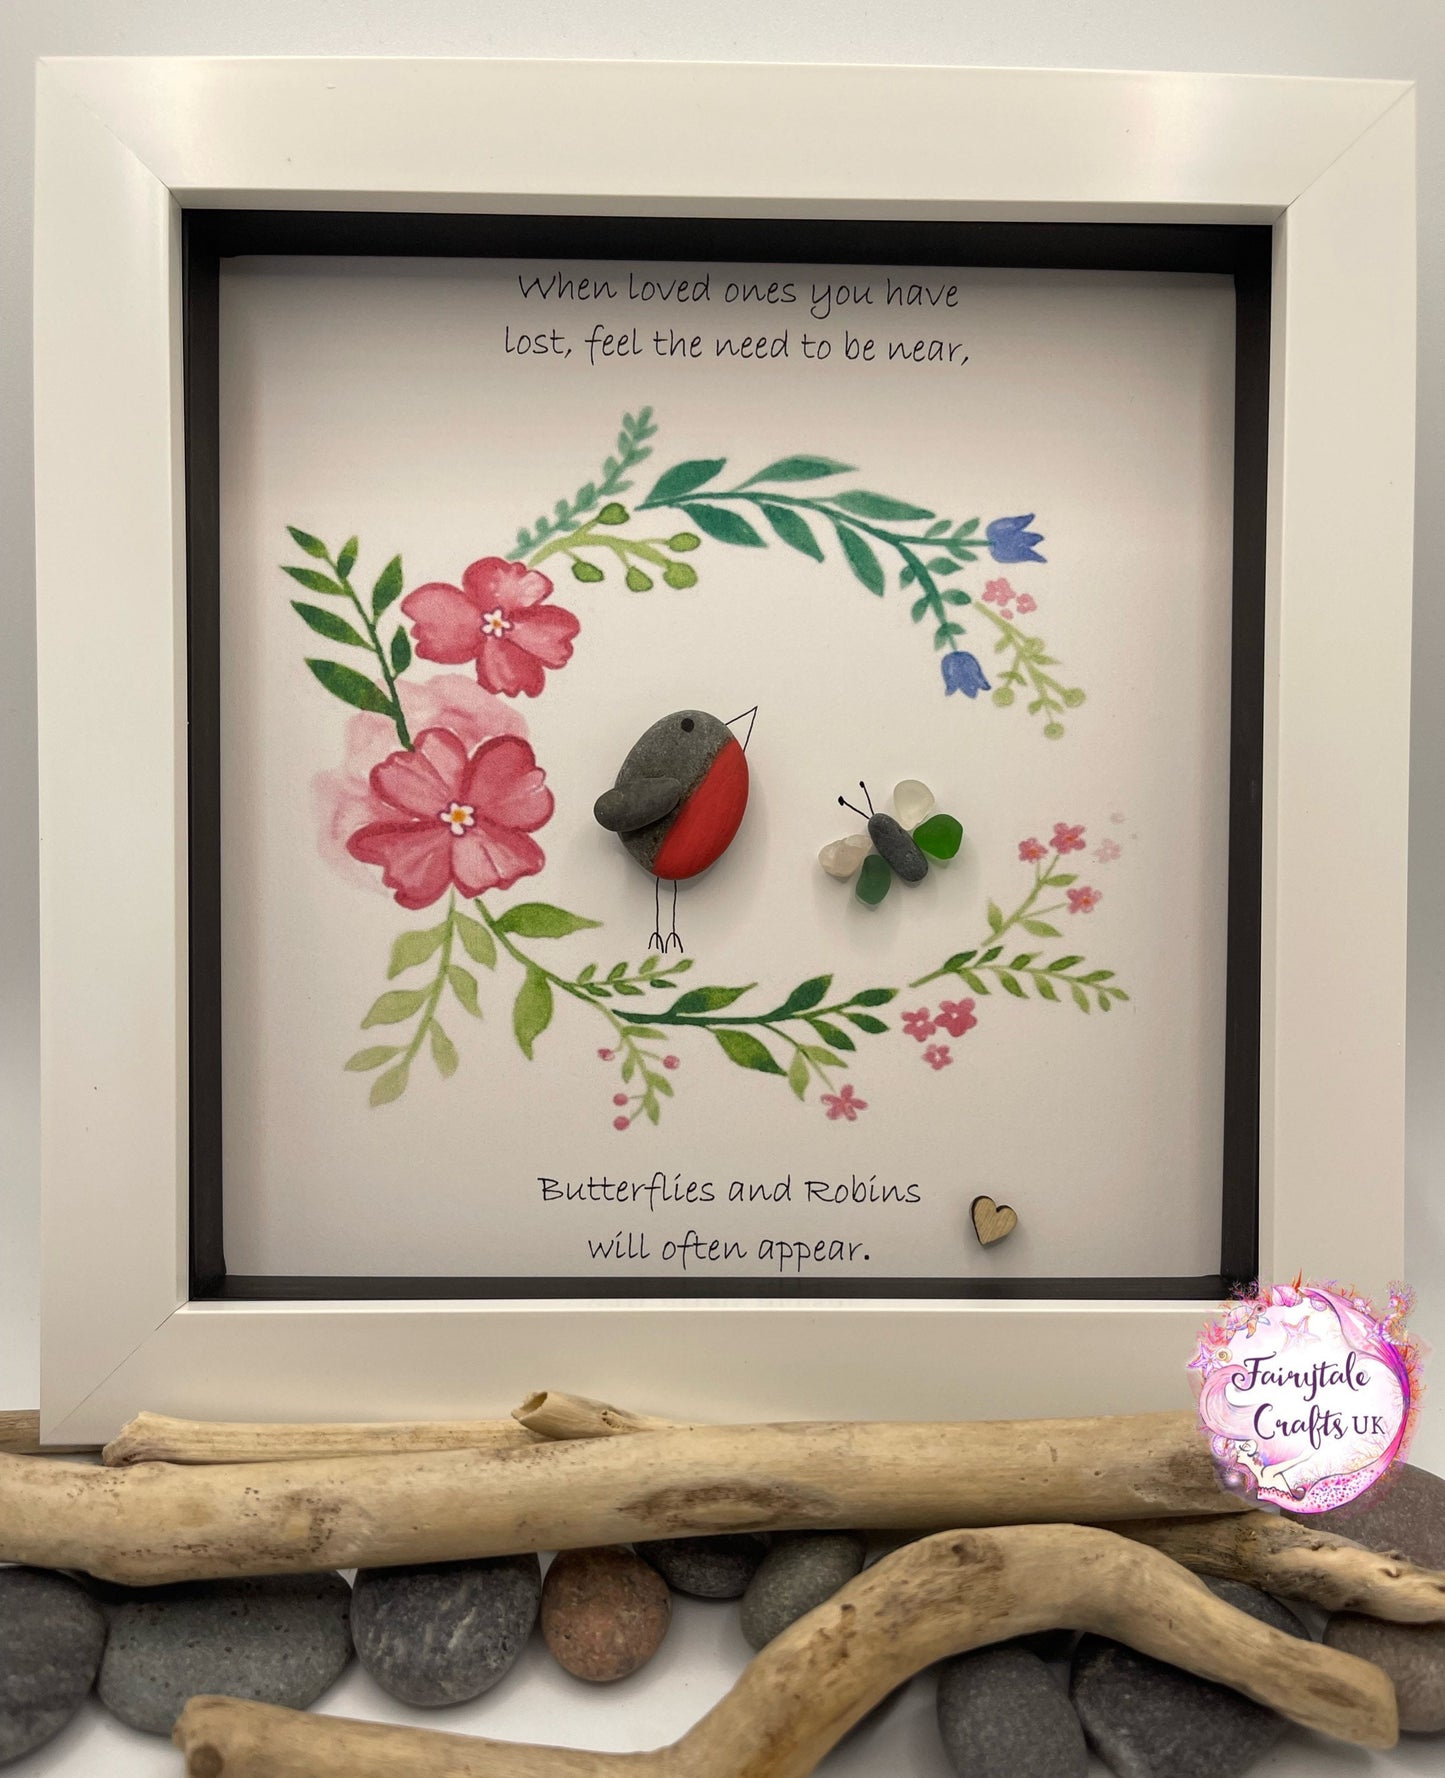 Robins appear when loved ones are near, pebble art, pebble art robin, sympathy gift, pebble art, pebble art bird, butterfly, sea glass